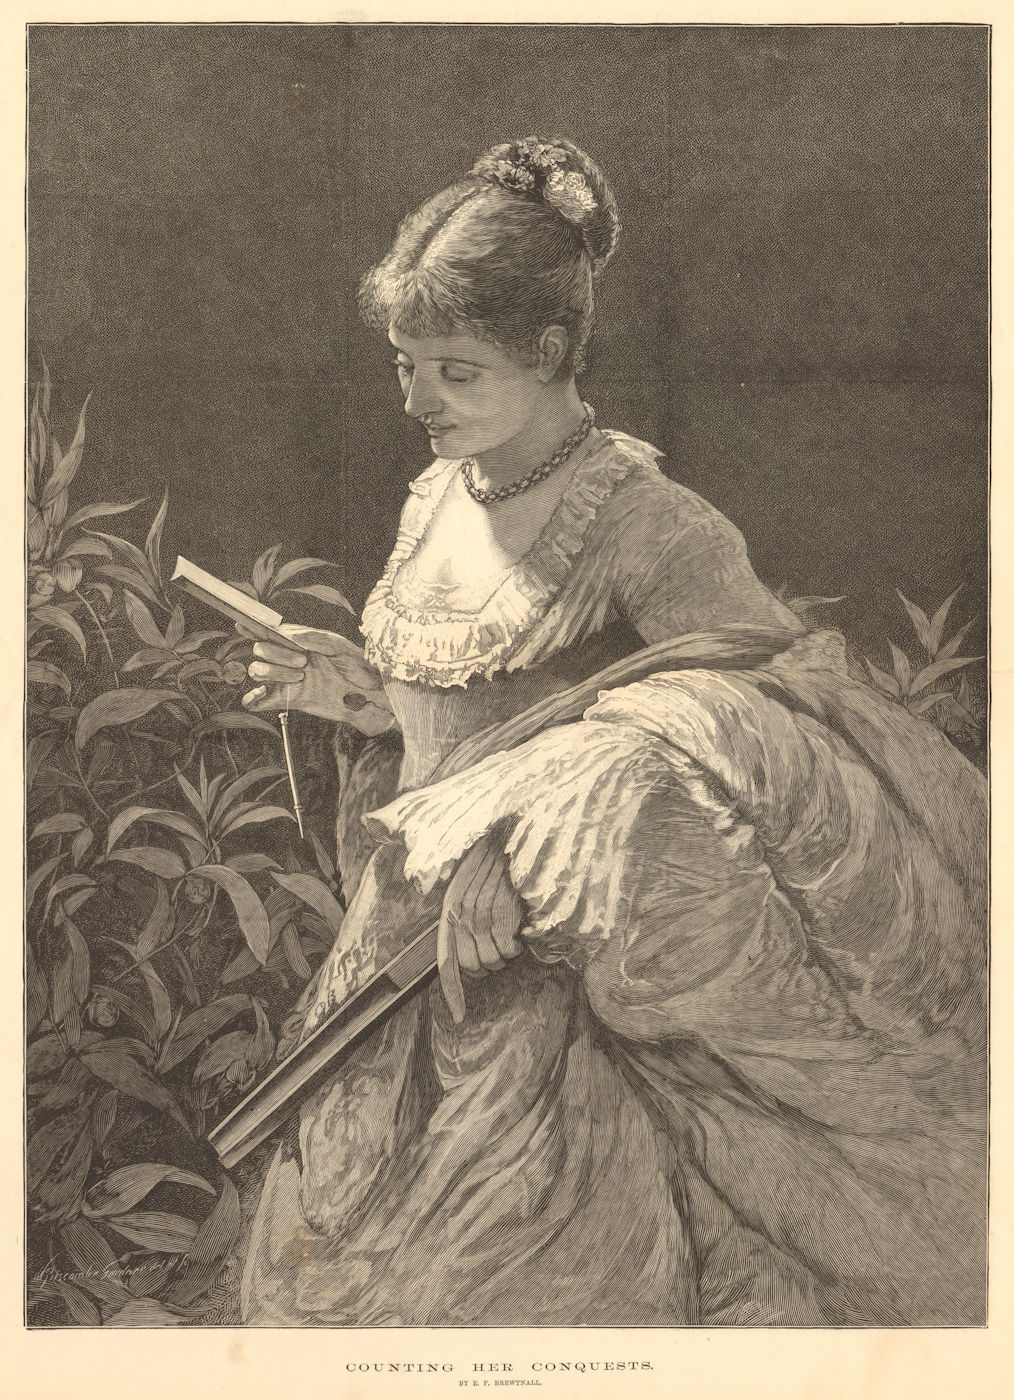 Counting her conquests, by E. F. Brewtnall. Pretty Ladies. Fine arts 1877